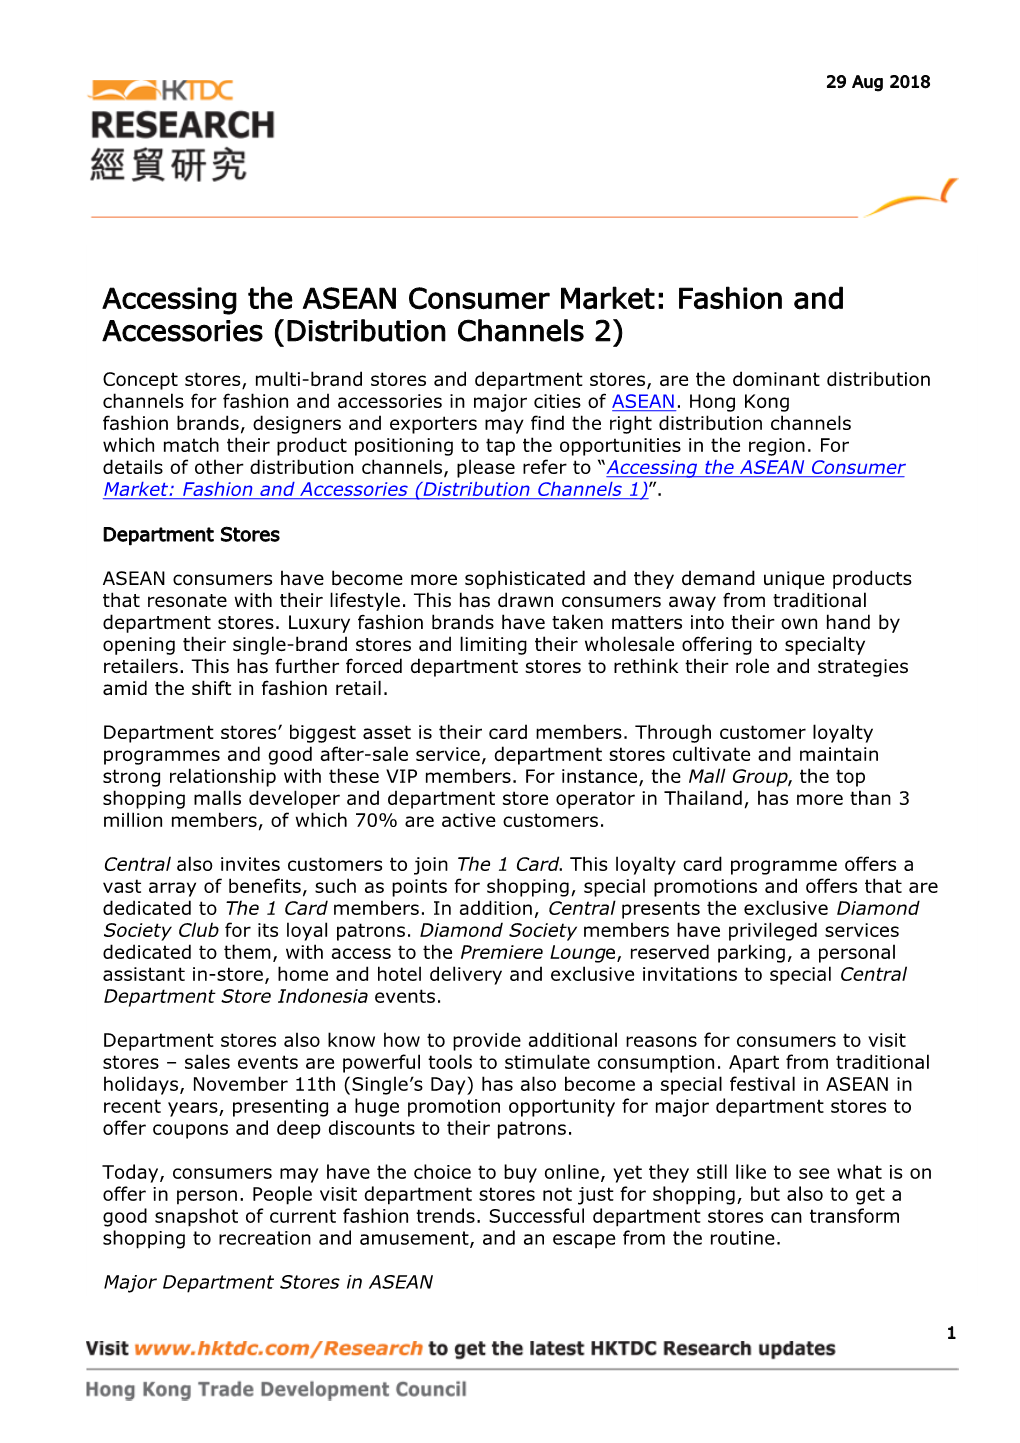 Accessing the ASEAN Consumer Market: Fashion and Accessories (Distribution Channels 2) | HKTDC